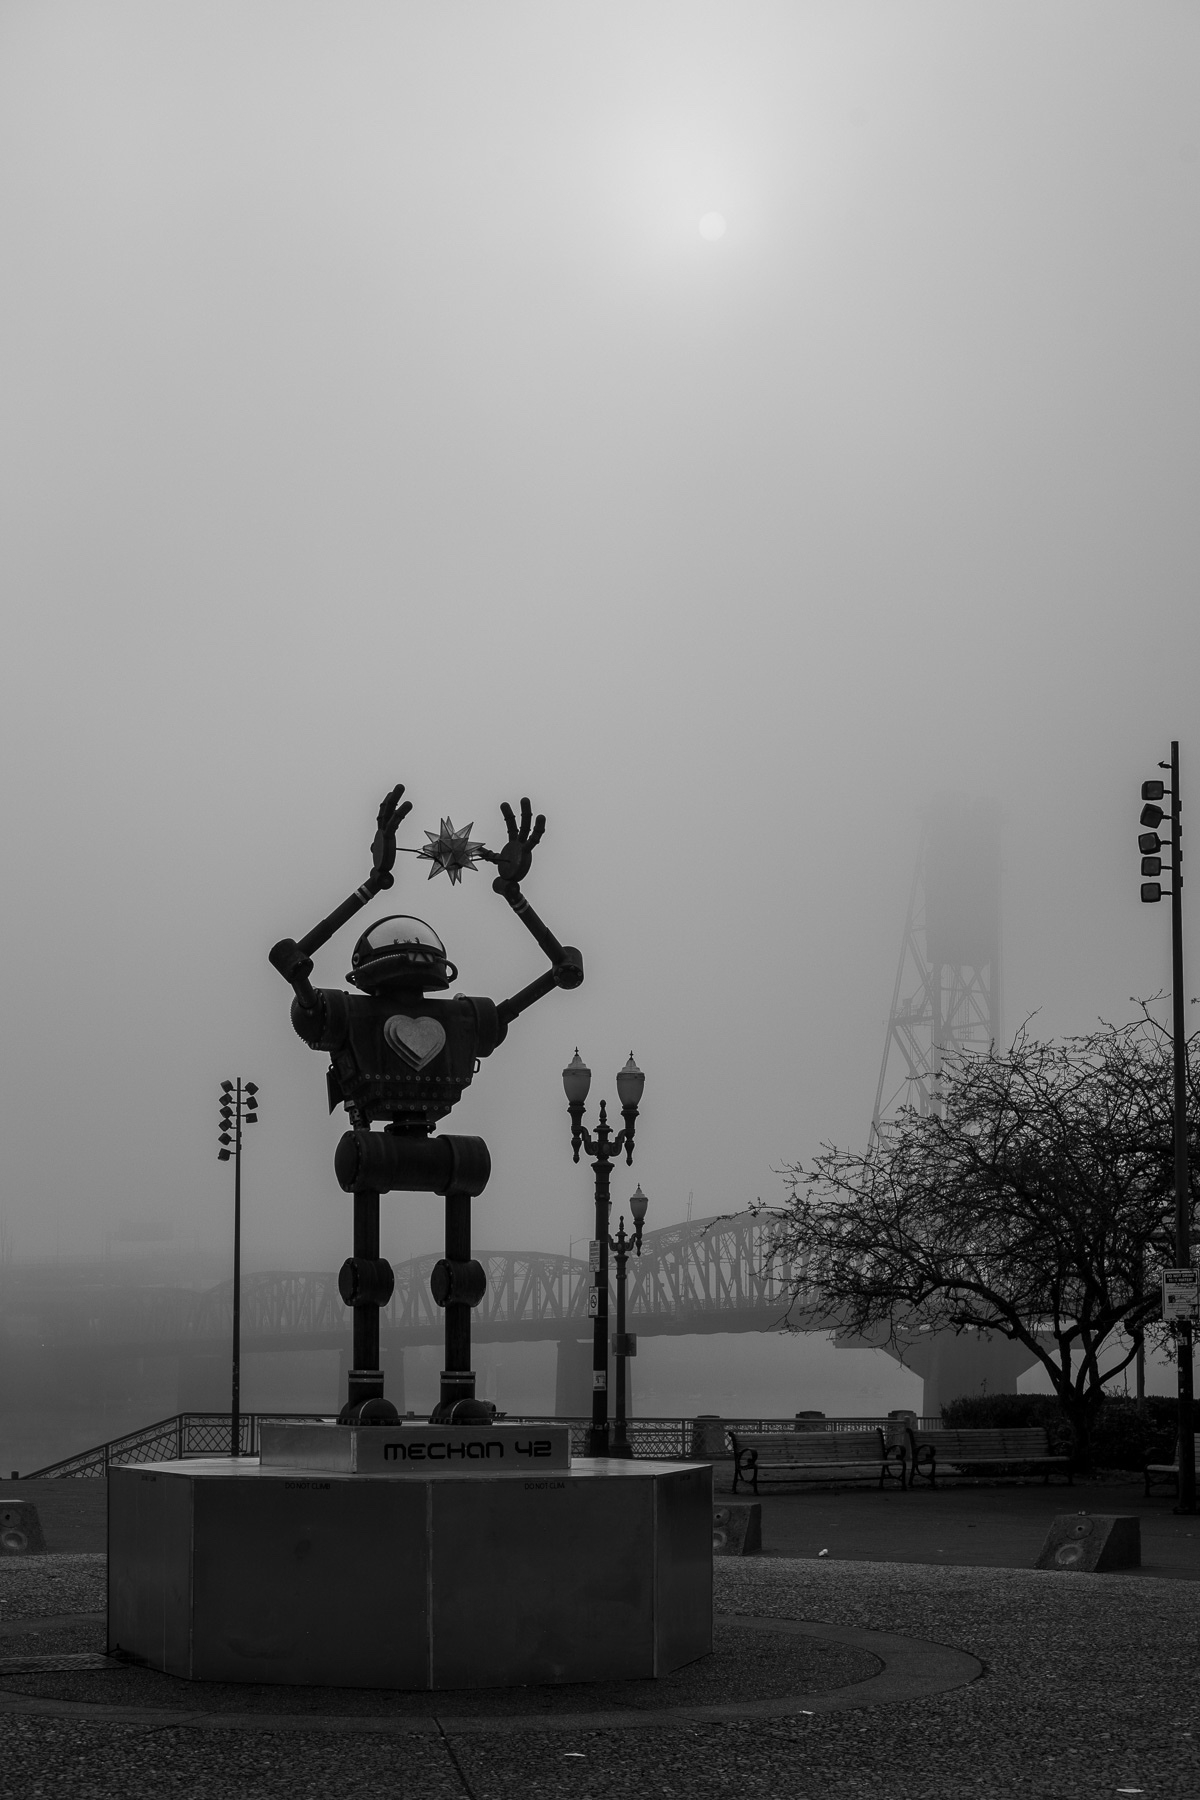 Black and white photo of a public art installation of a 17’ tall robot on a 4’ platform holding a star in its raised hands. Foggy morning scene with a bridge behind and the Sun above.